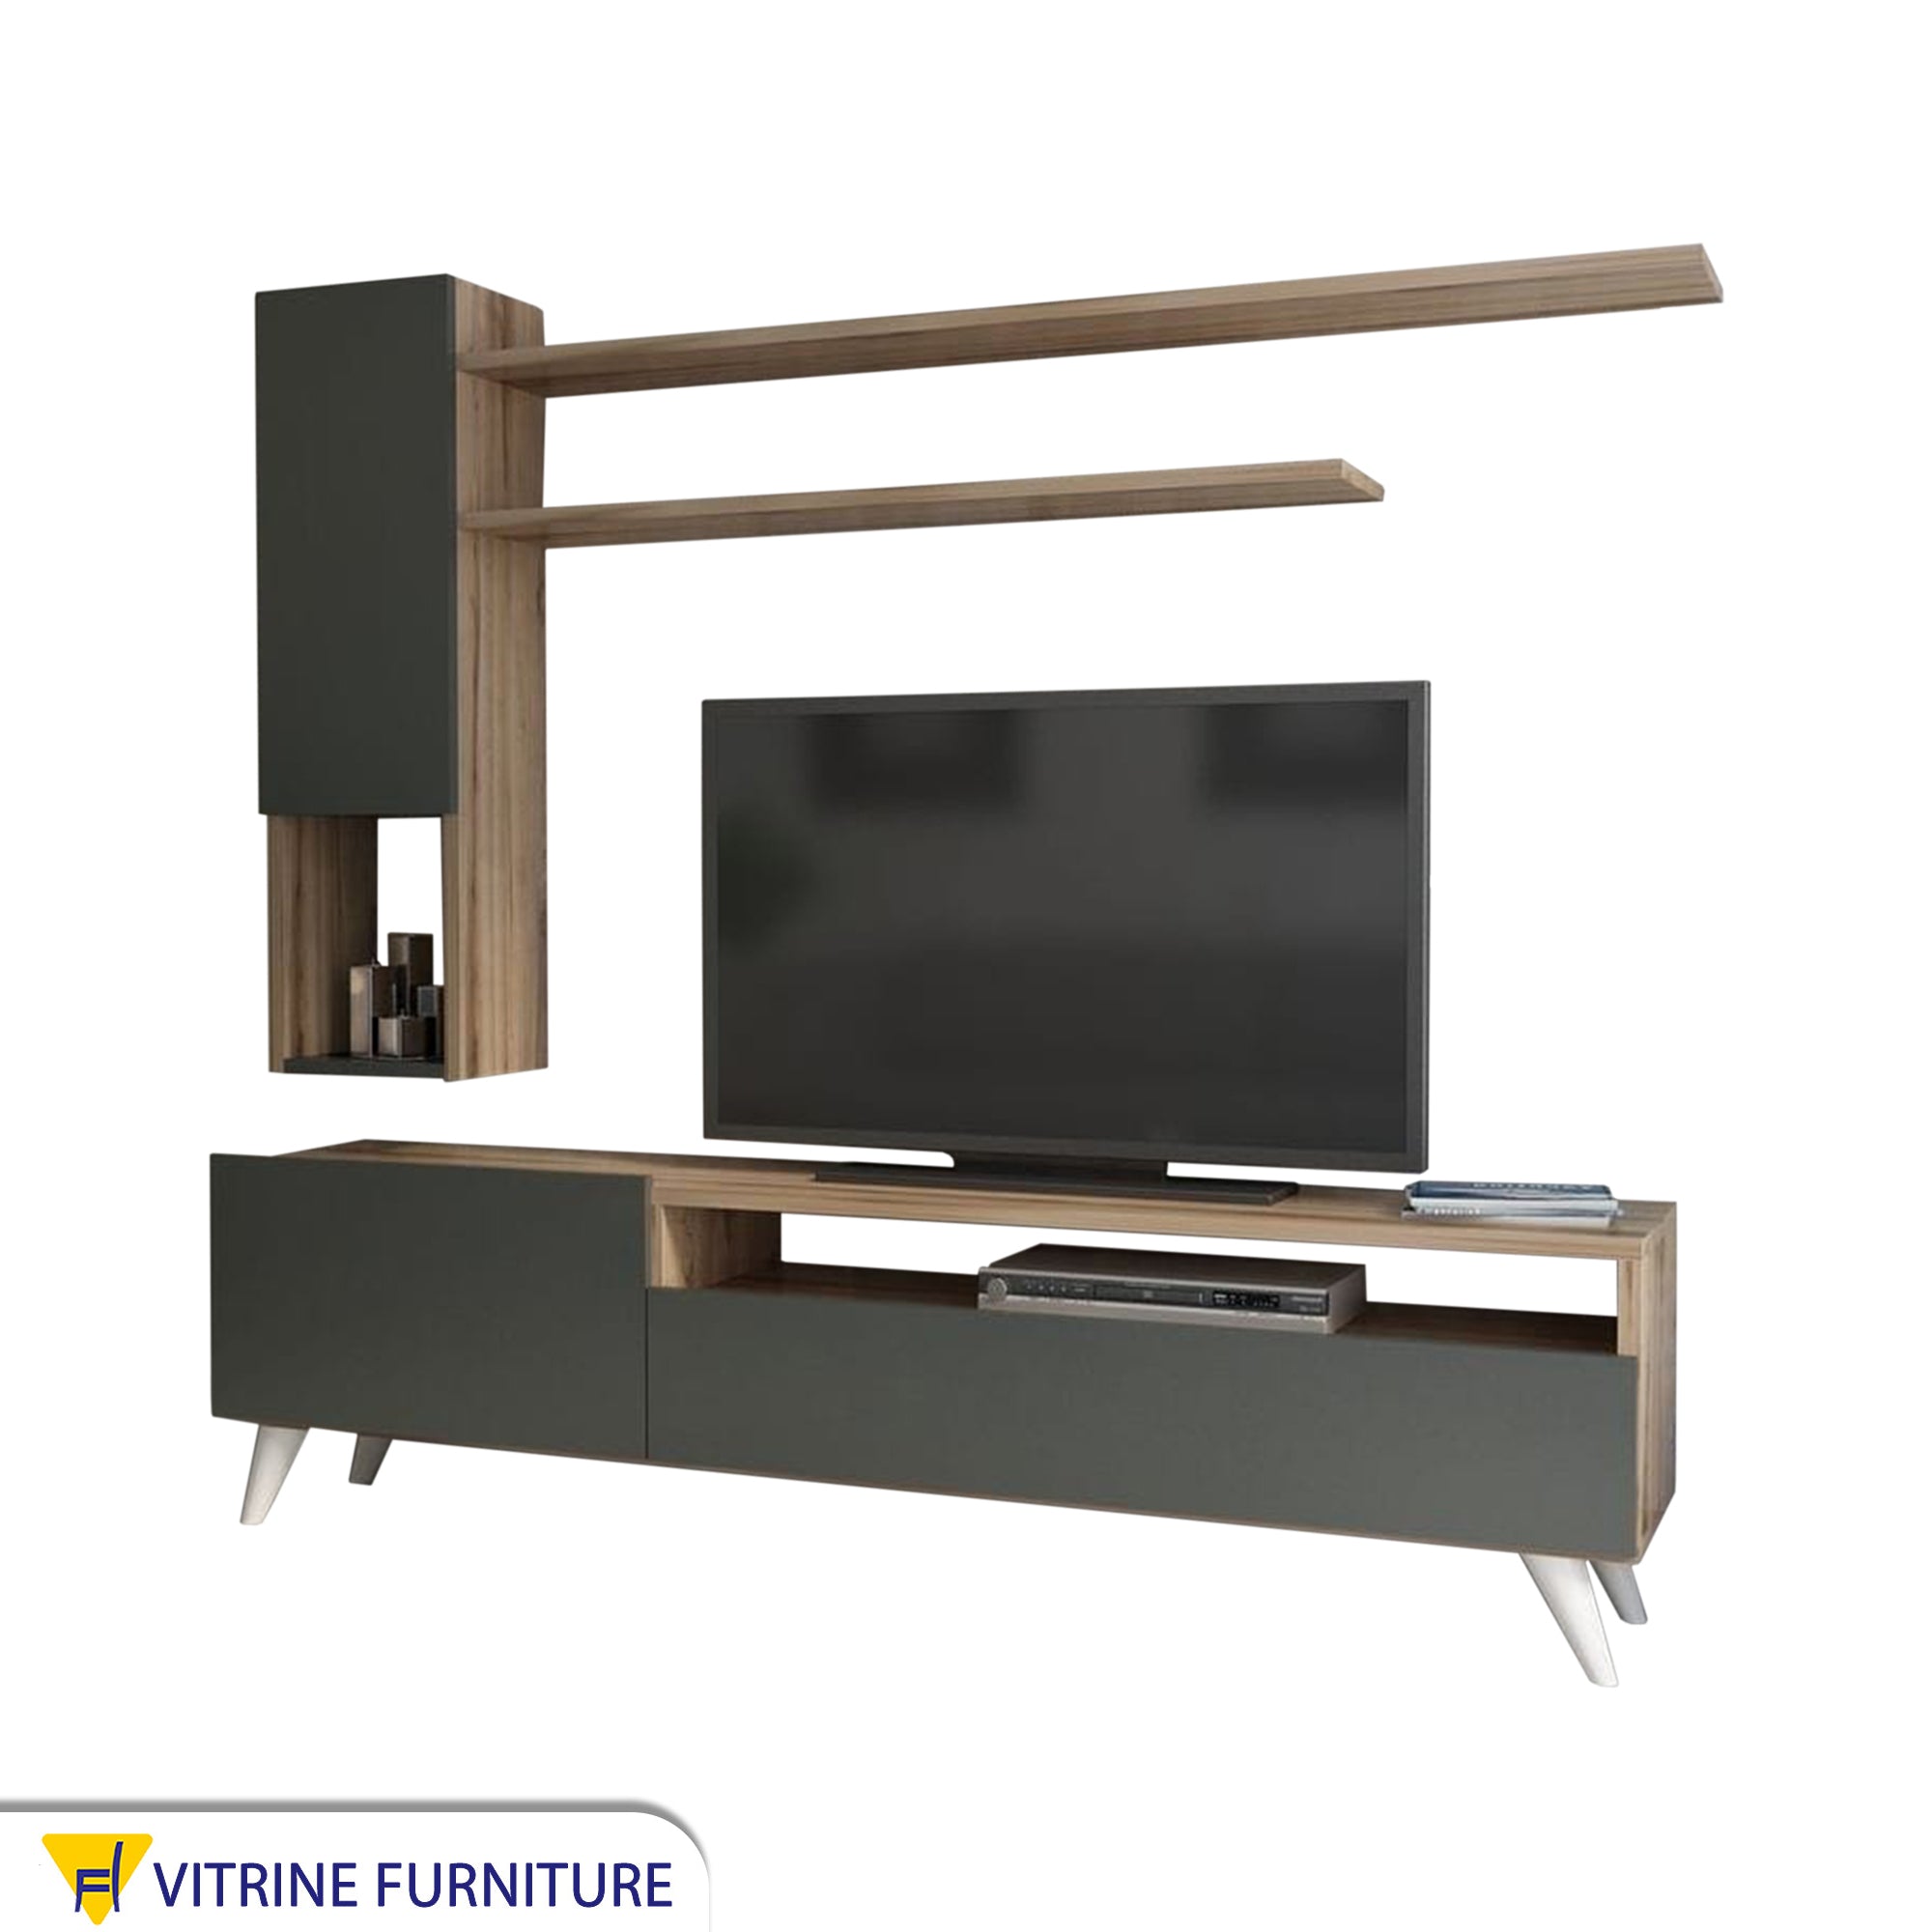 TV unit in a coffee wooden color * black